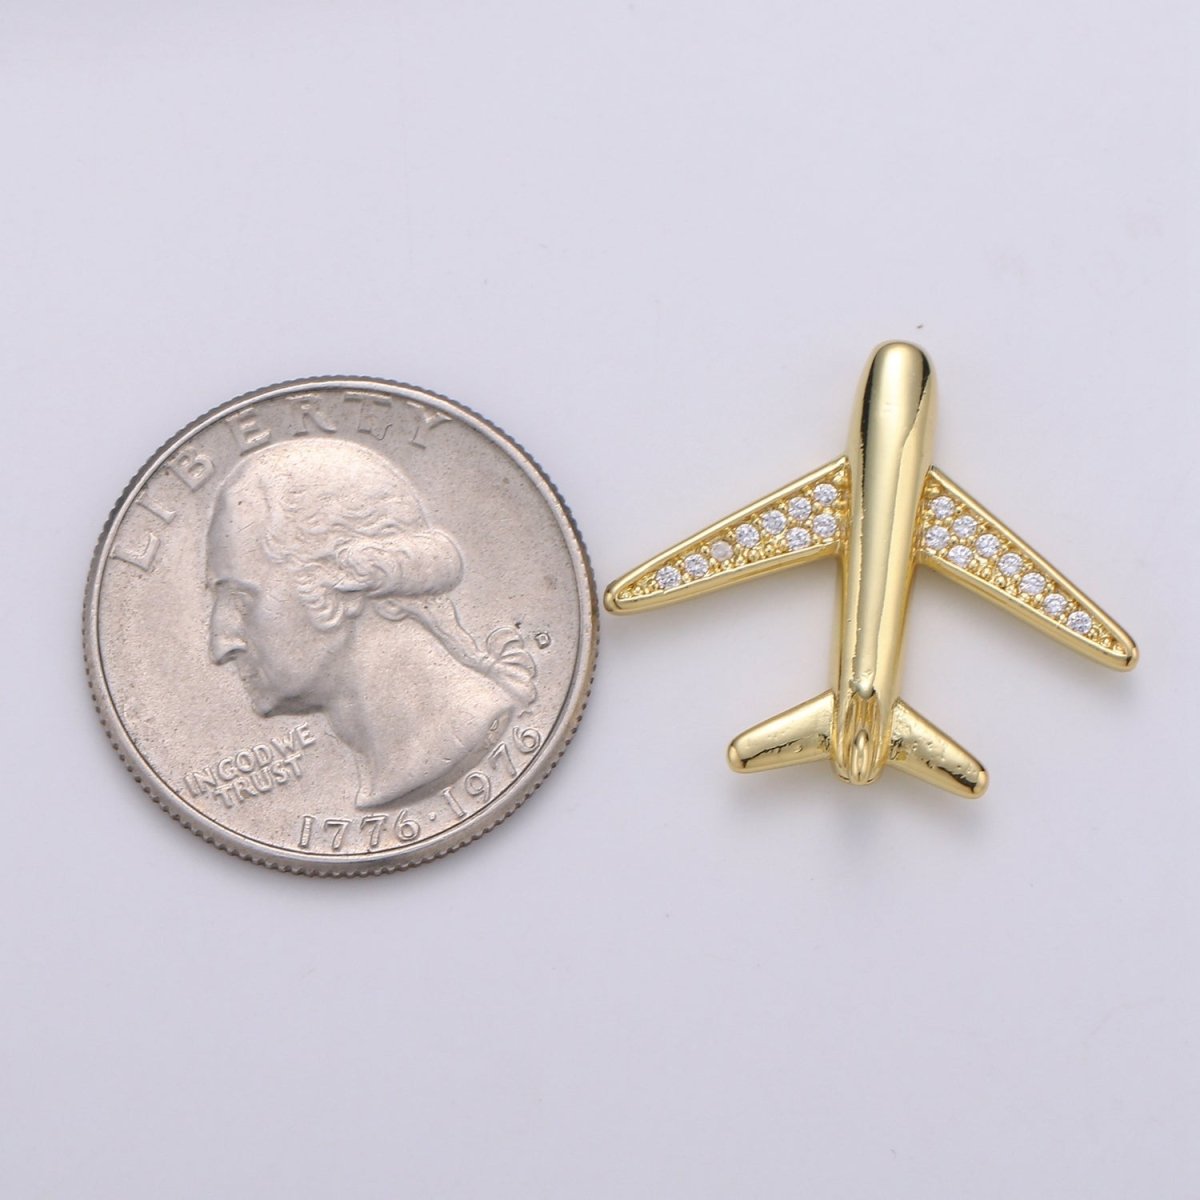 Tiny Simple Golden Plane Beads CZ Crystal Wings Plain Gold Filled Airlines Transport Accessories/Jewelry Making Beads B393 - DLUXCA